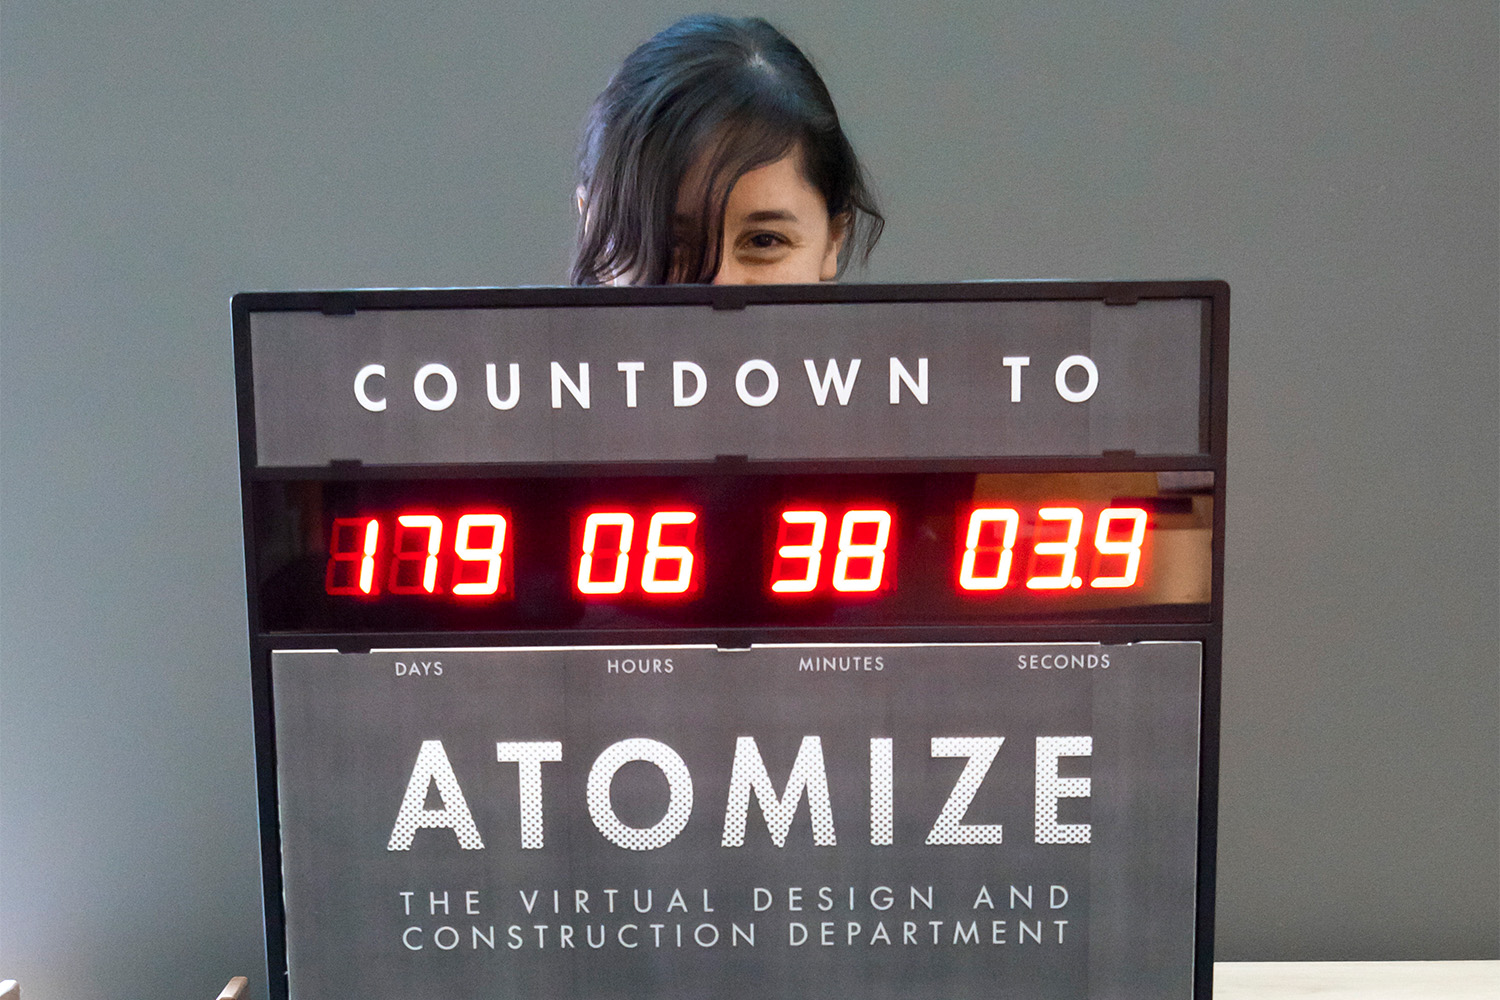 Laura holding up a sign, which counts down time until atomization 